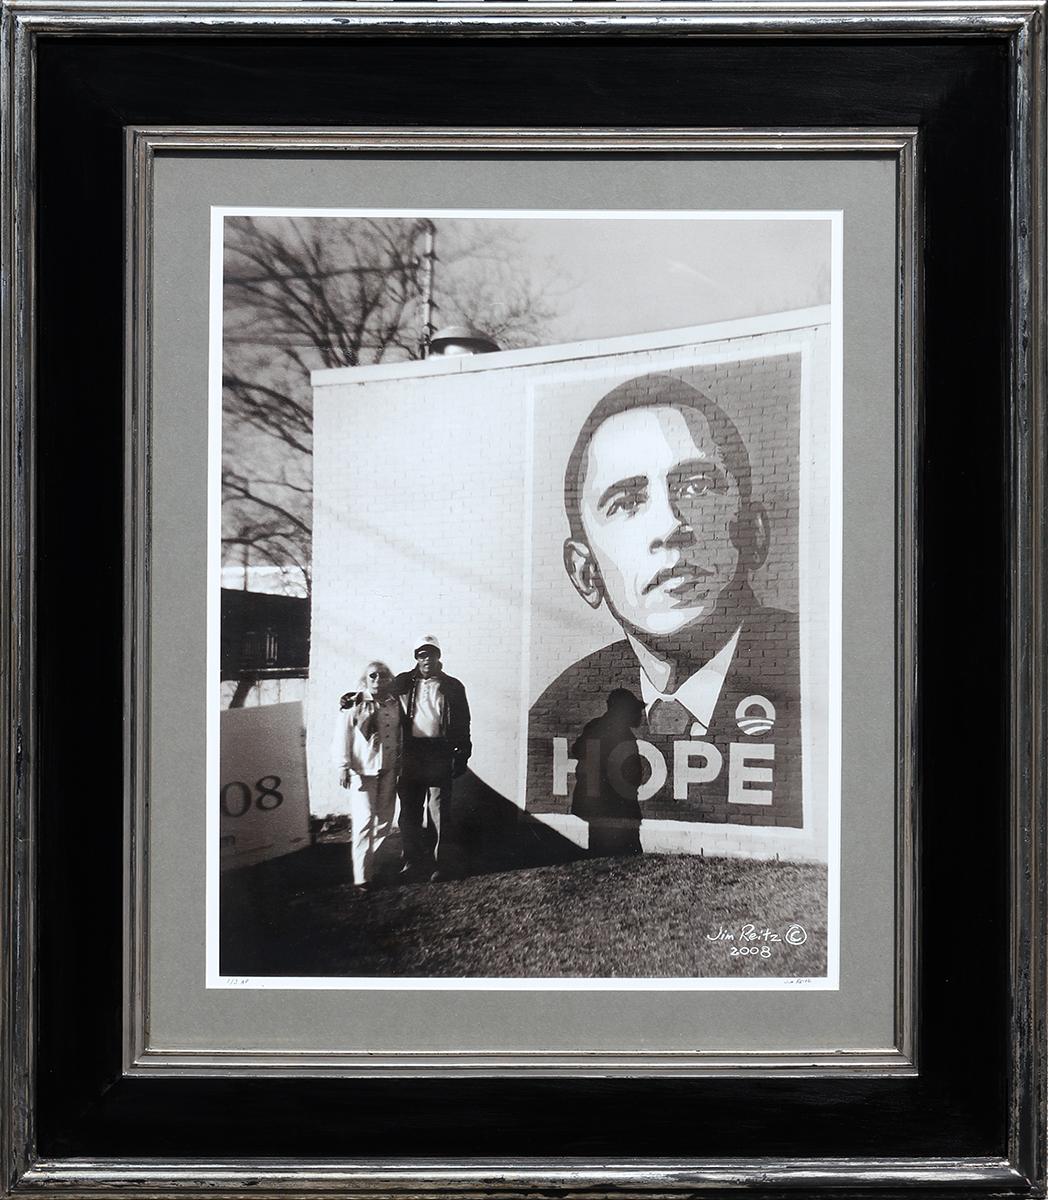 Jim Reitz Black and White Photograph - Contemporary Black and White Street Photograph of a Couple with an Obama Mural